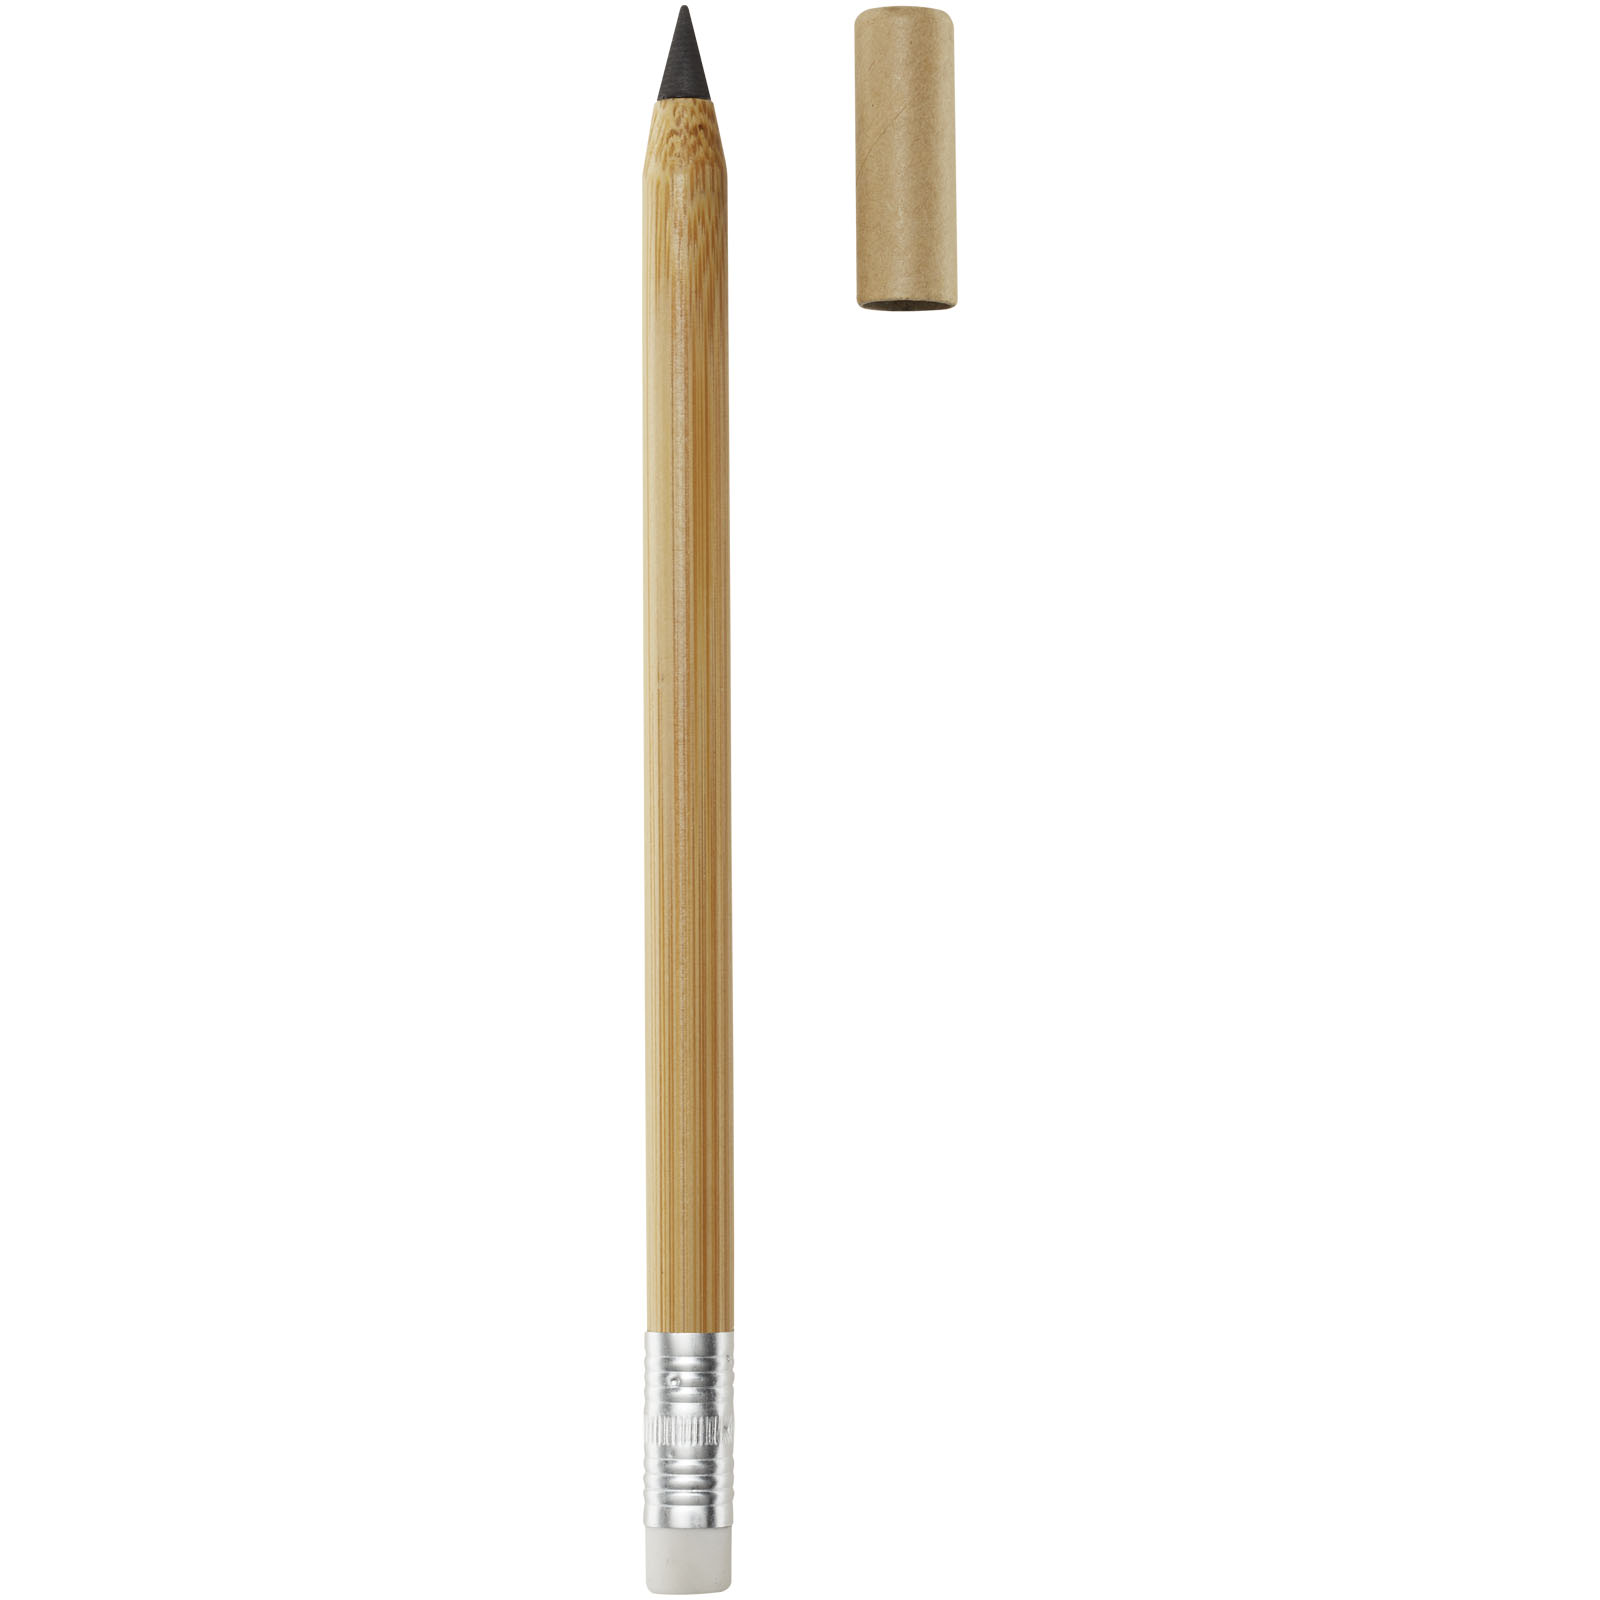 Advertising Other Pens & Writing Accessories - Krajono bamboo inkless pen  - 1